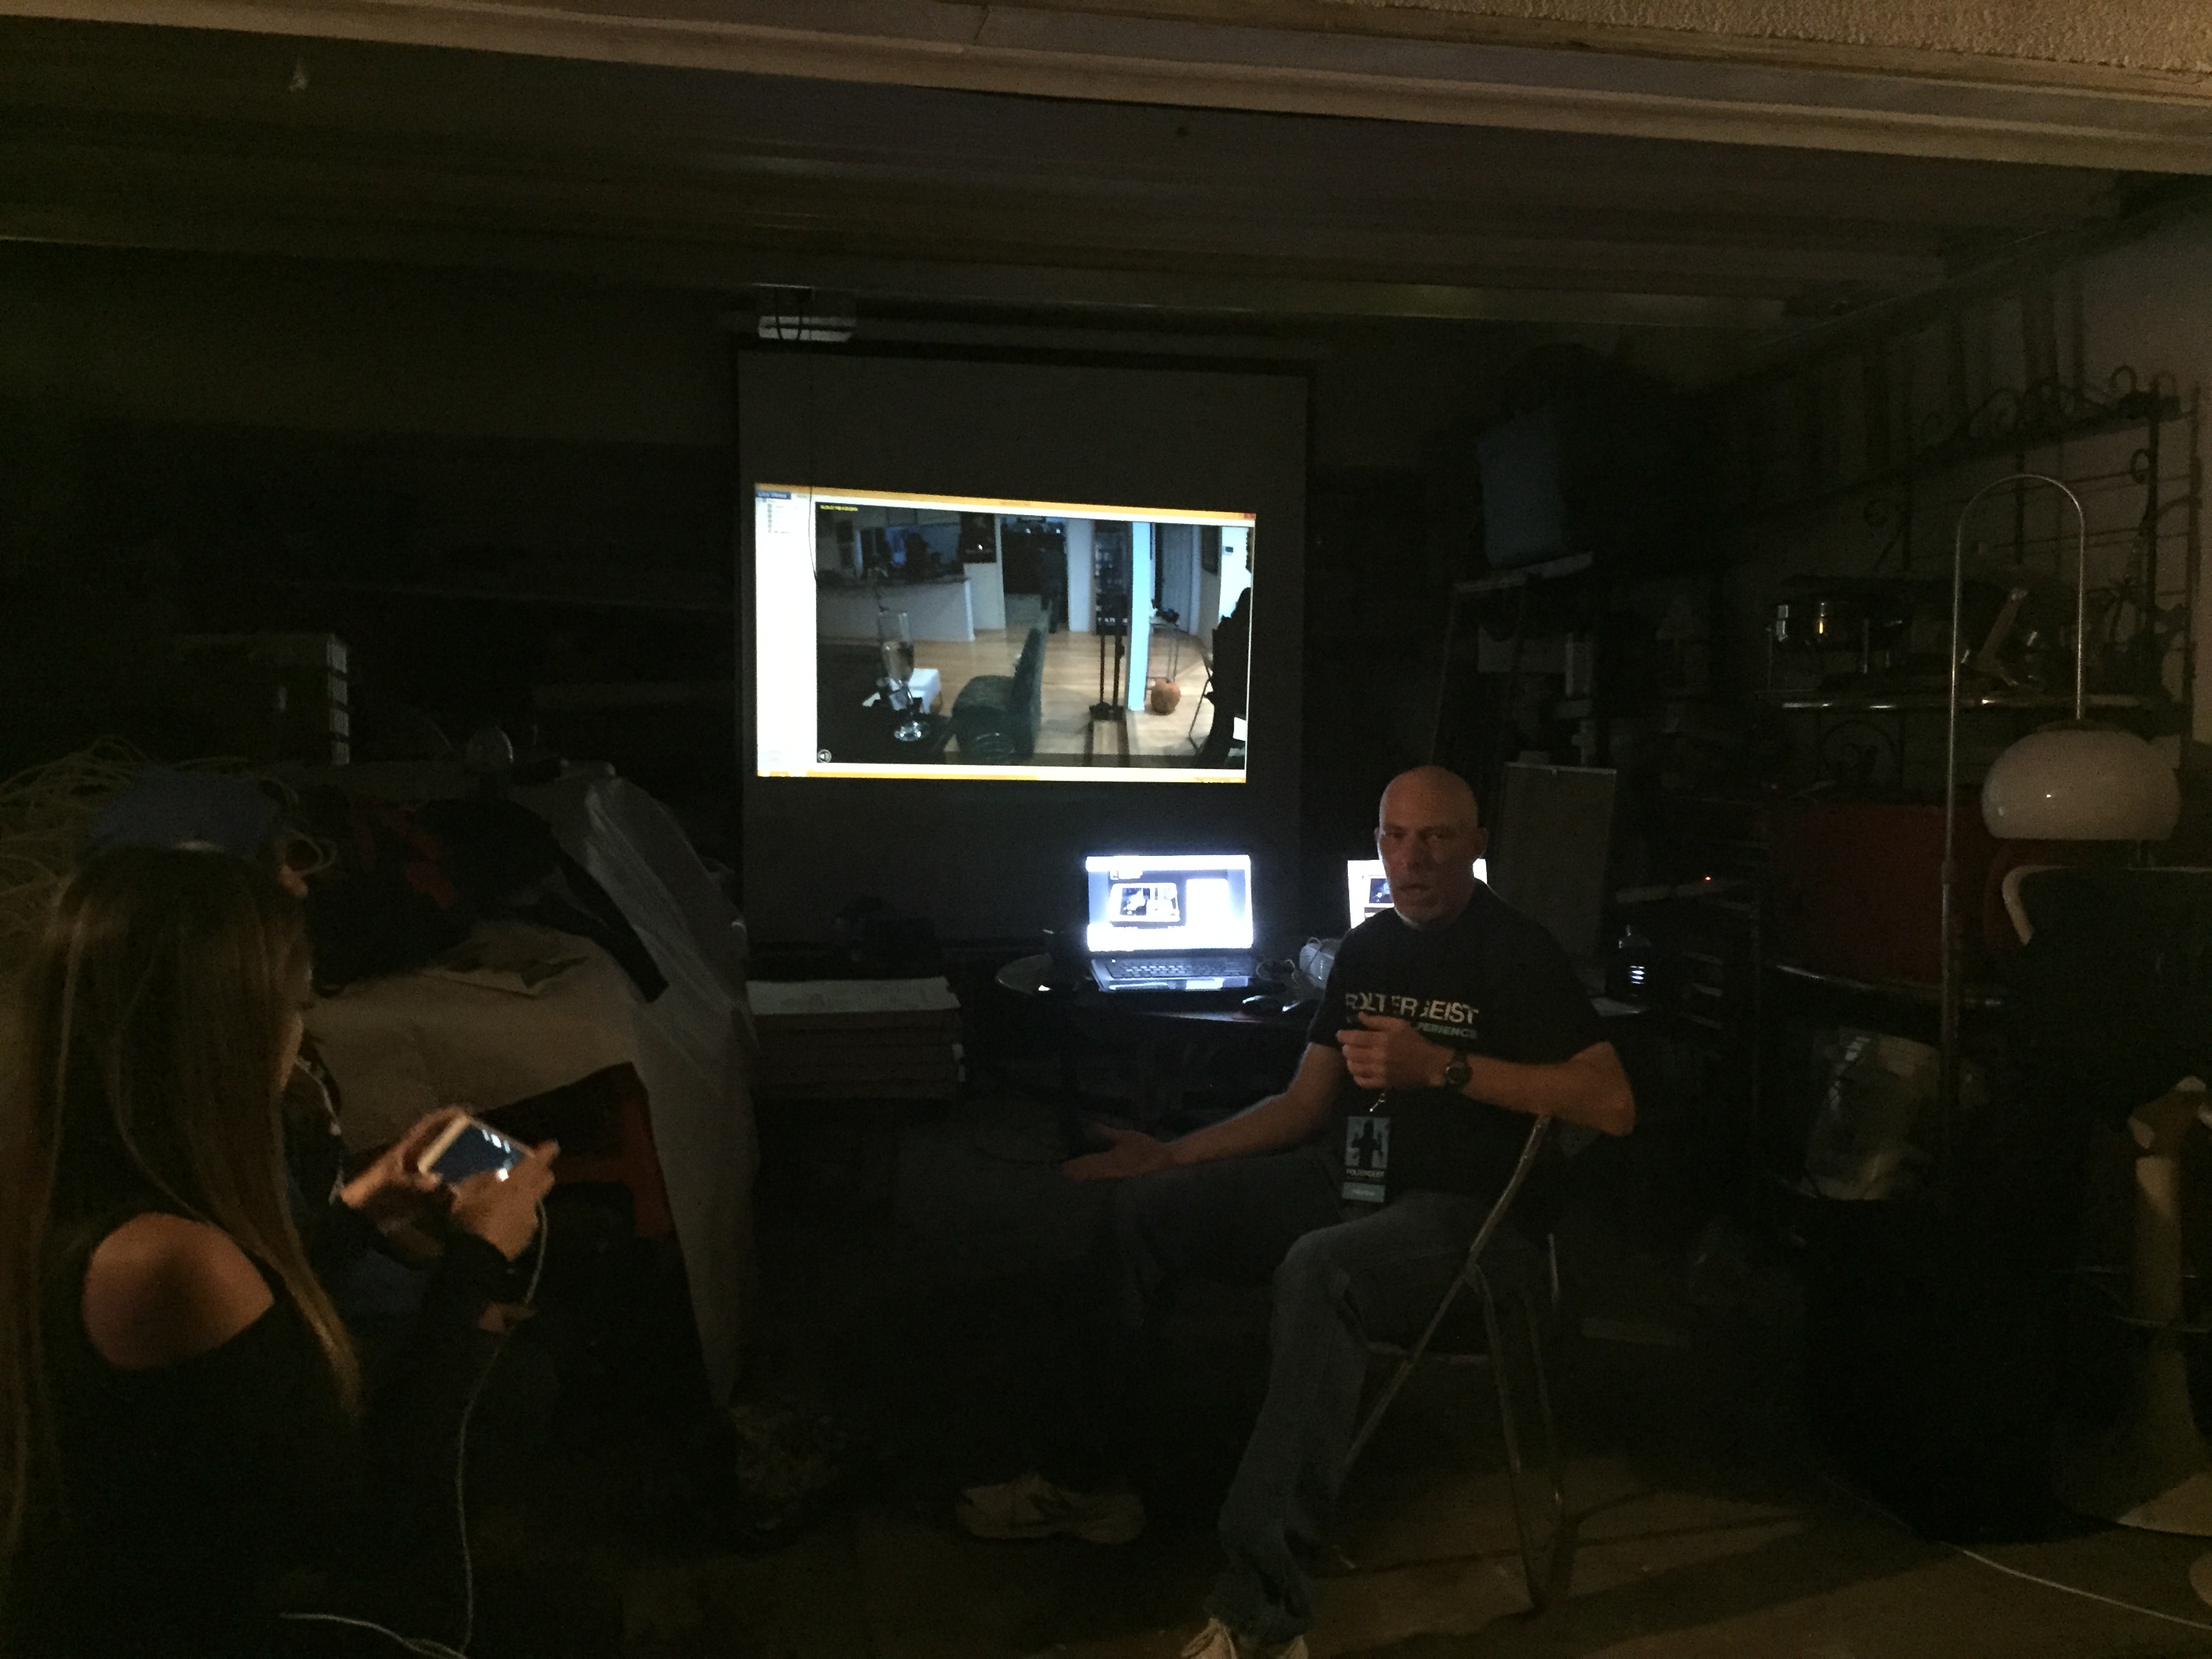 In the Oman House garage, people could watch footage to try and find evidence of ghosts. (Photo: Liz Ohanesian)